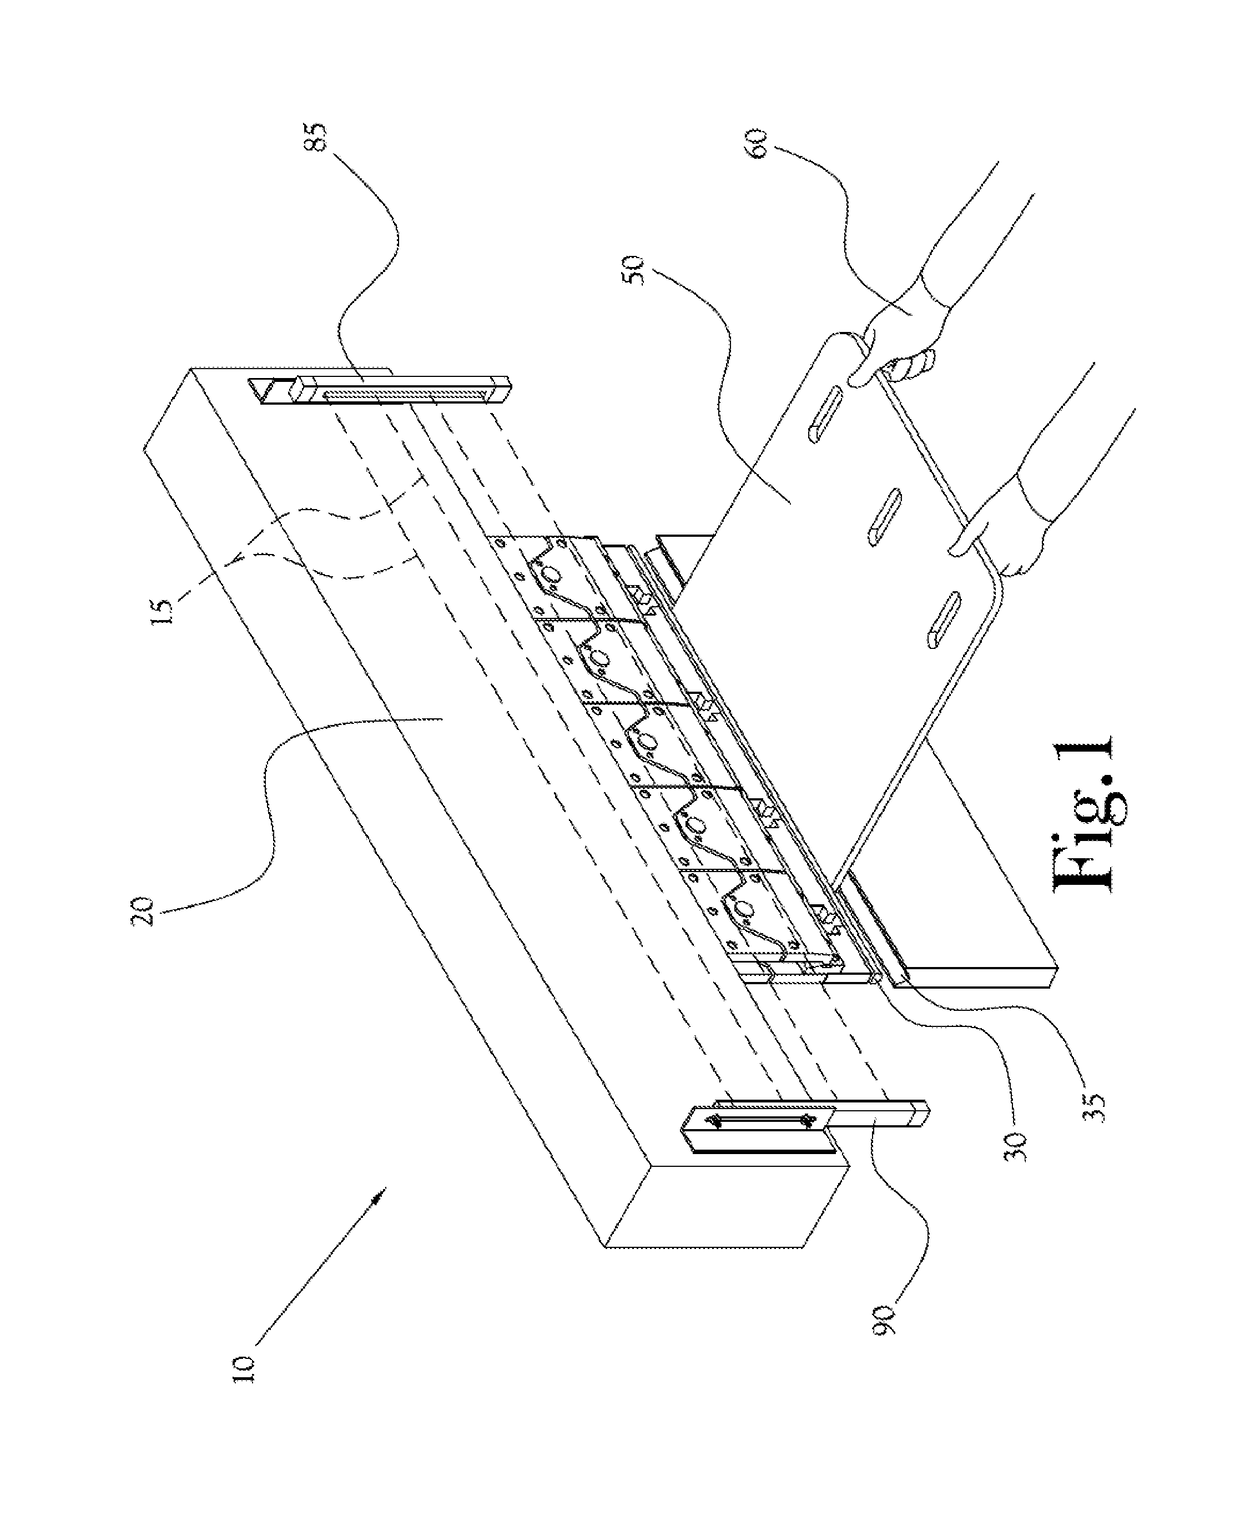 Secondary light curtain for detecting crush zone intrusion in a secondary process and associated method for use